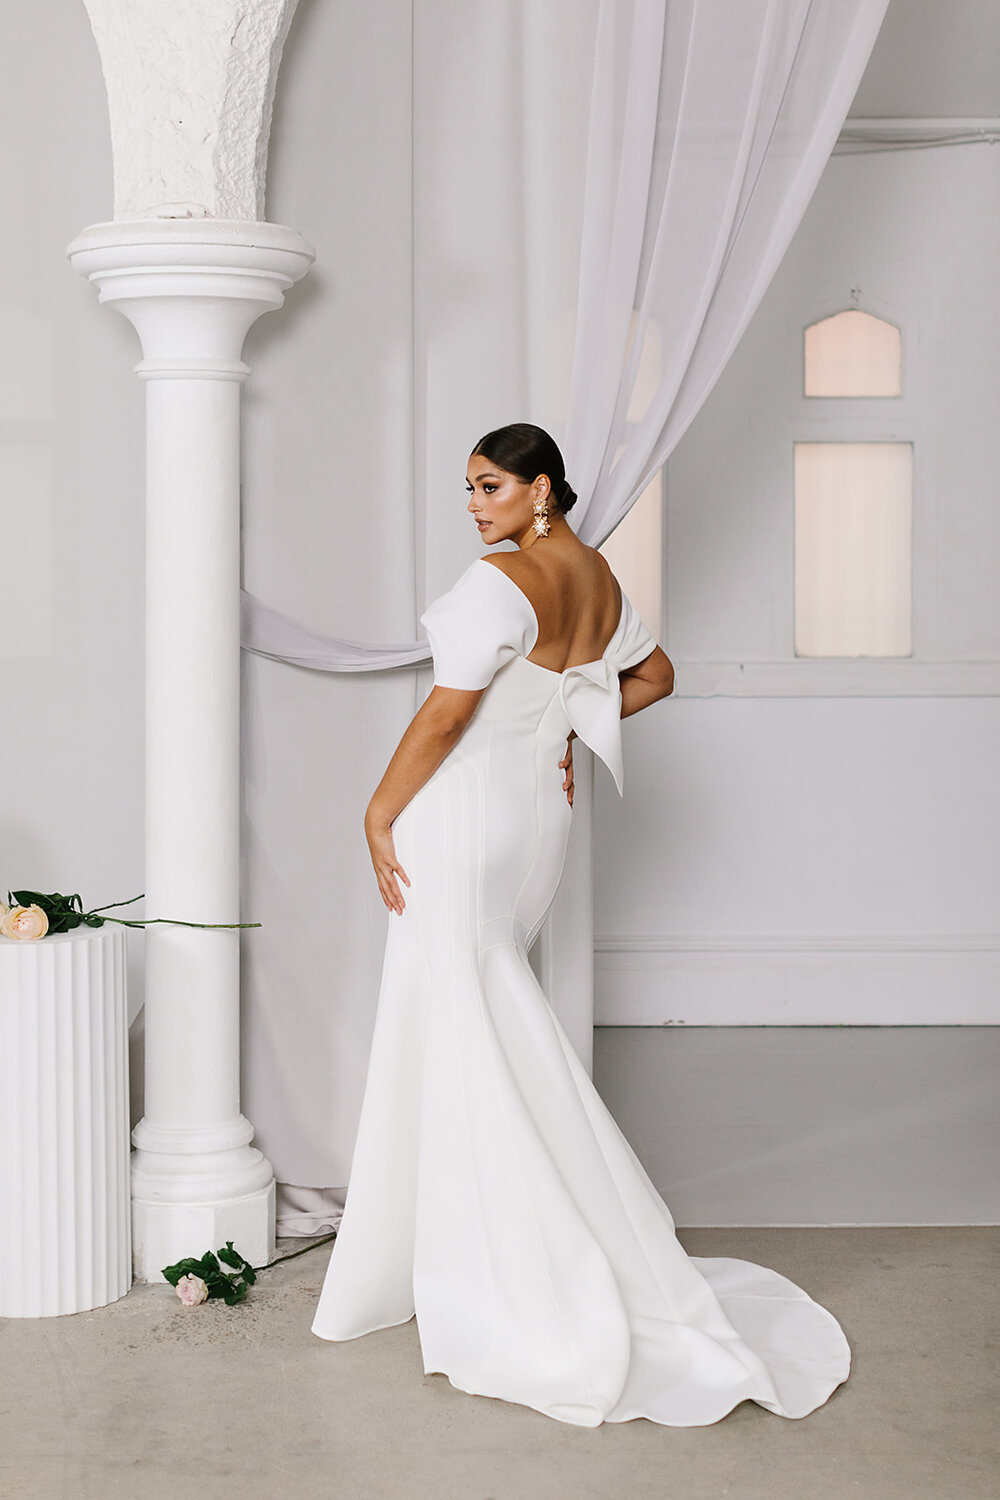 Wedding Dress — Wedding Inspiration For Your Special Day